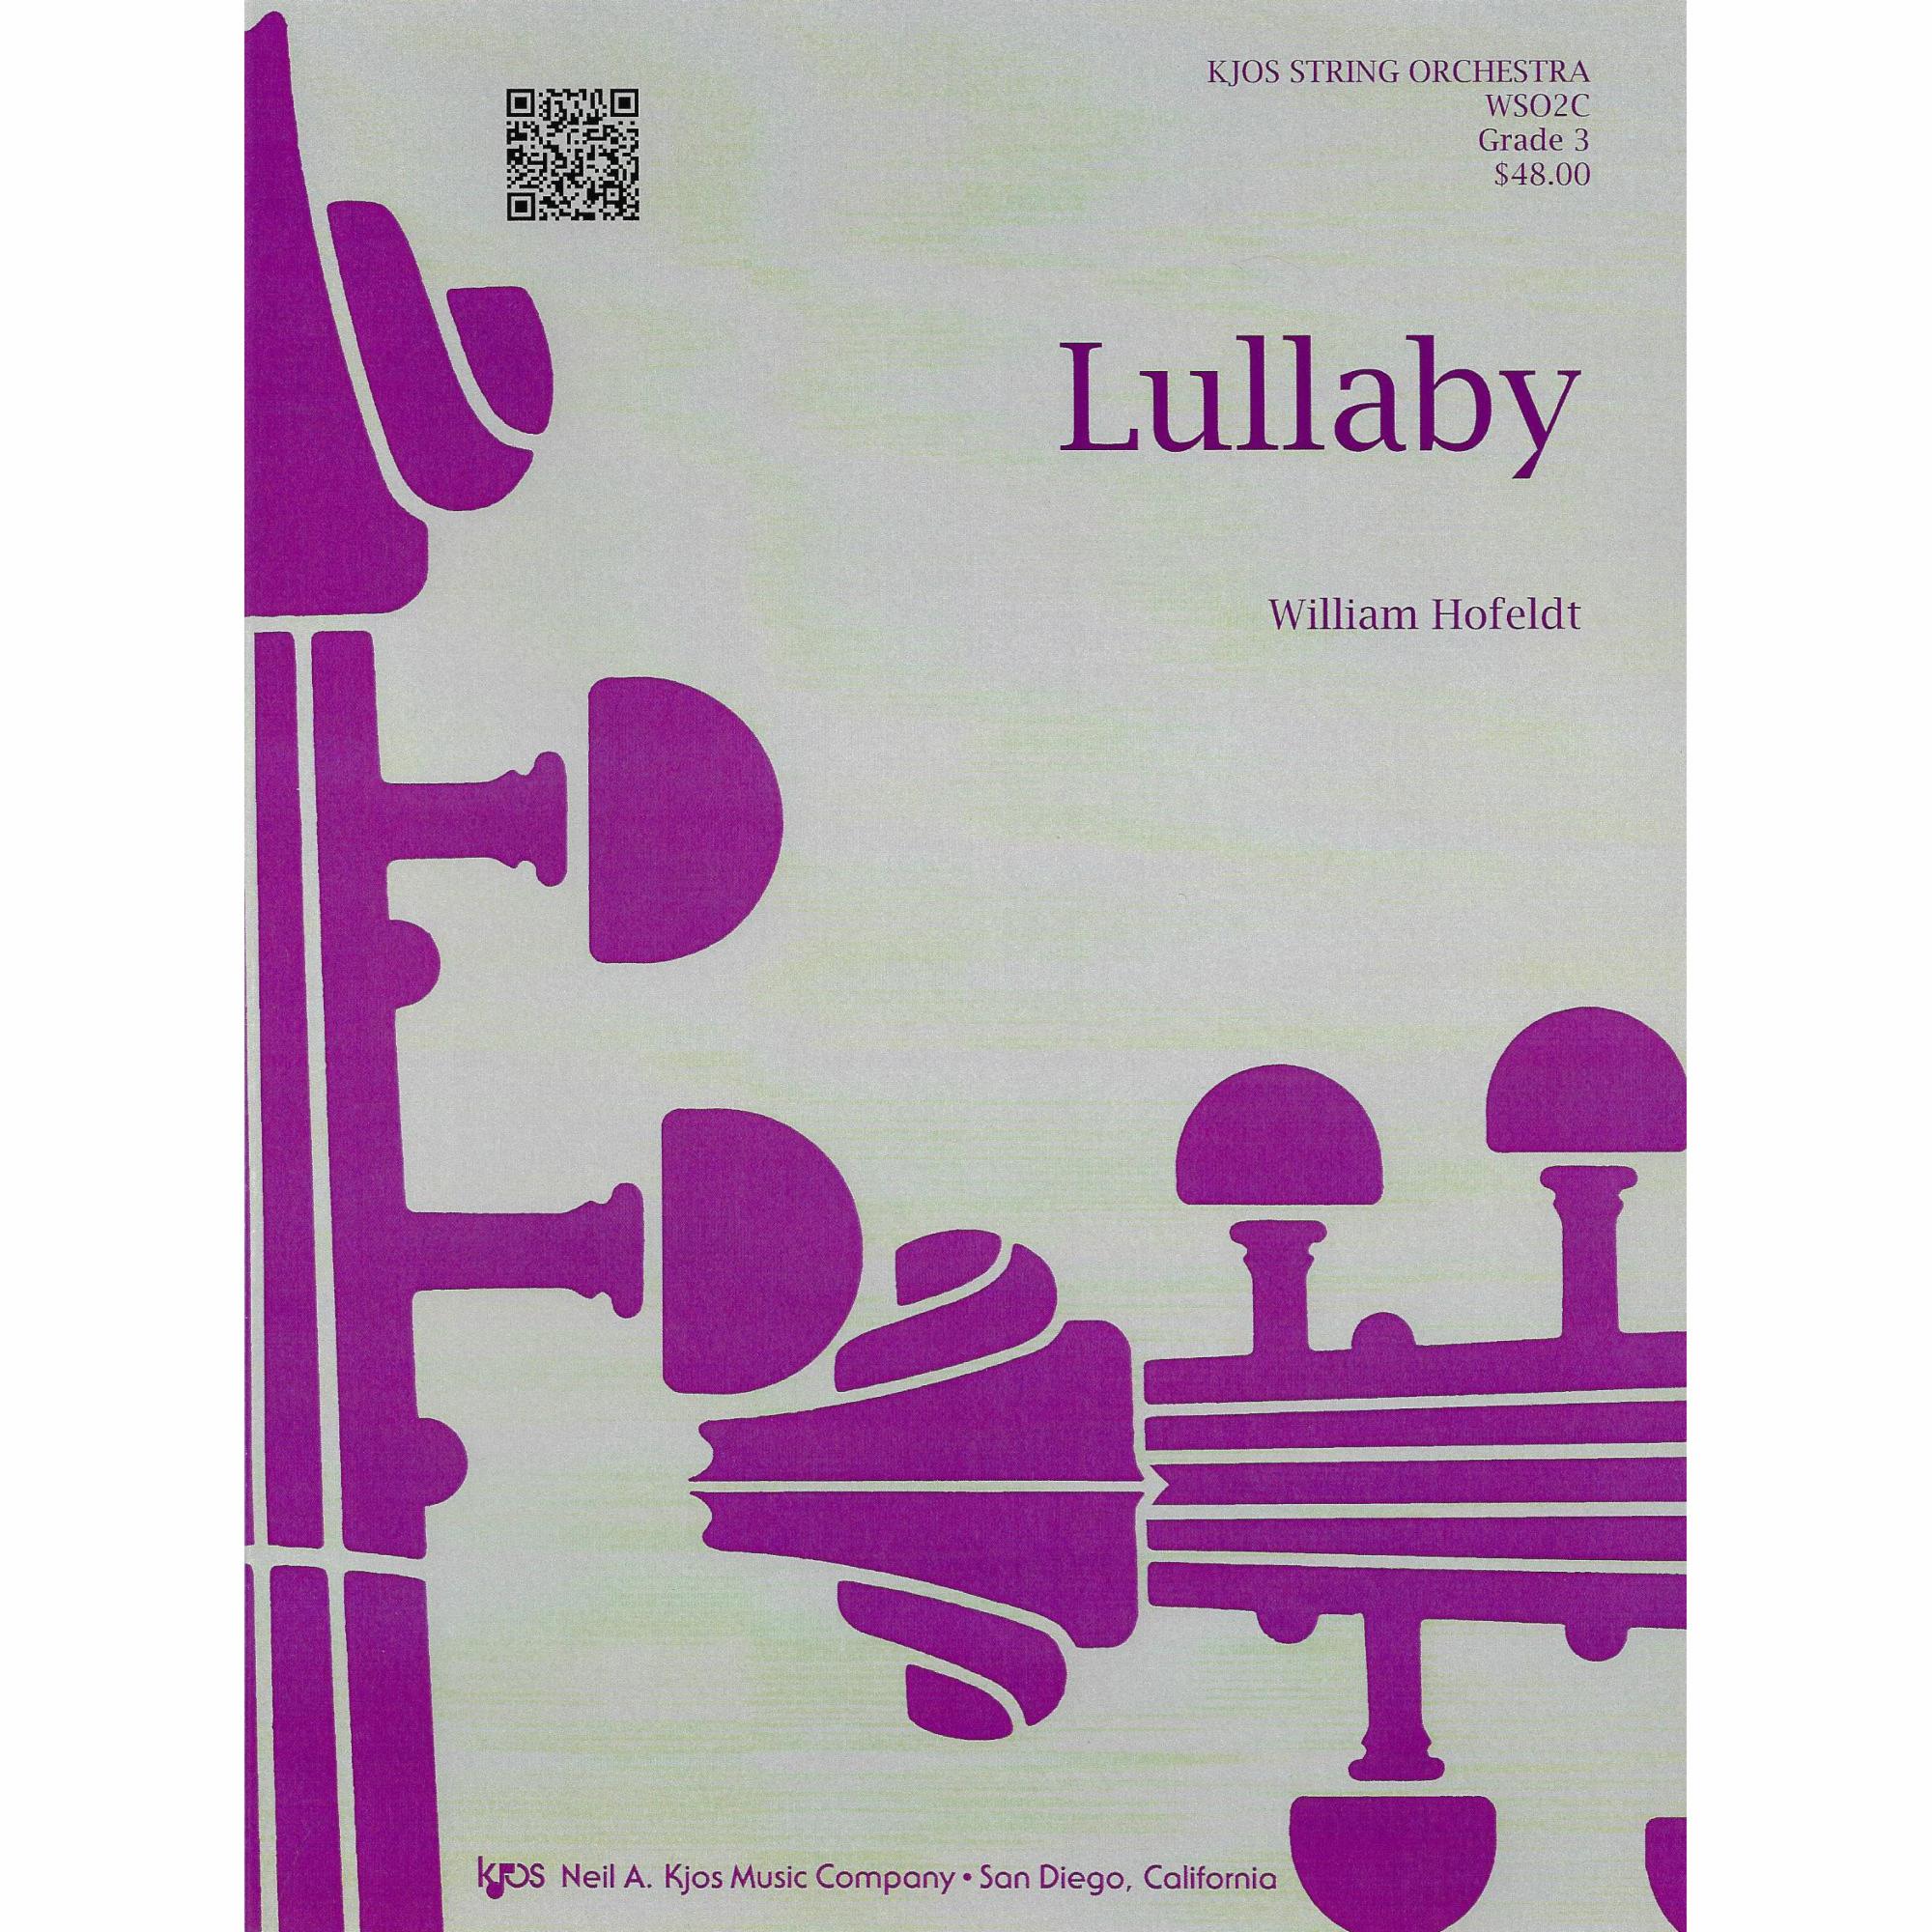 Lullaby for String Orchestra